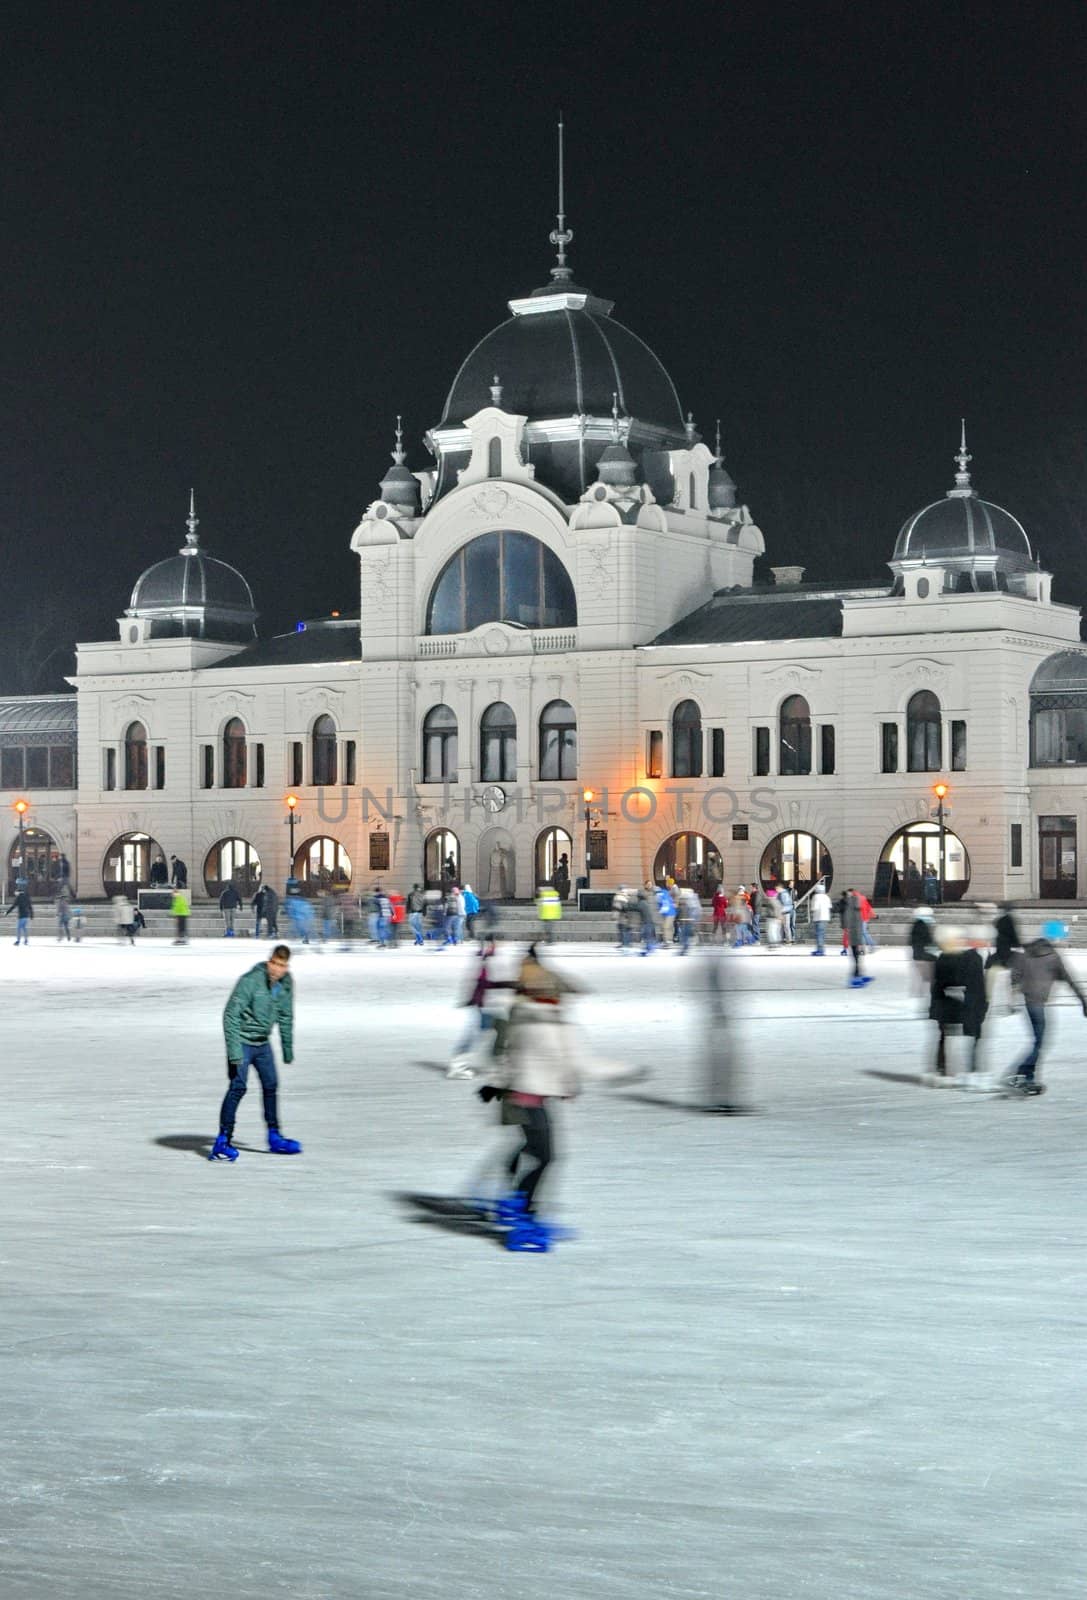 BUDAPEST - DECEMBER 13:Ice skaters in City Park Ice Rink on Dece by anderm